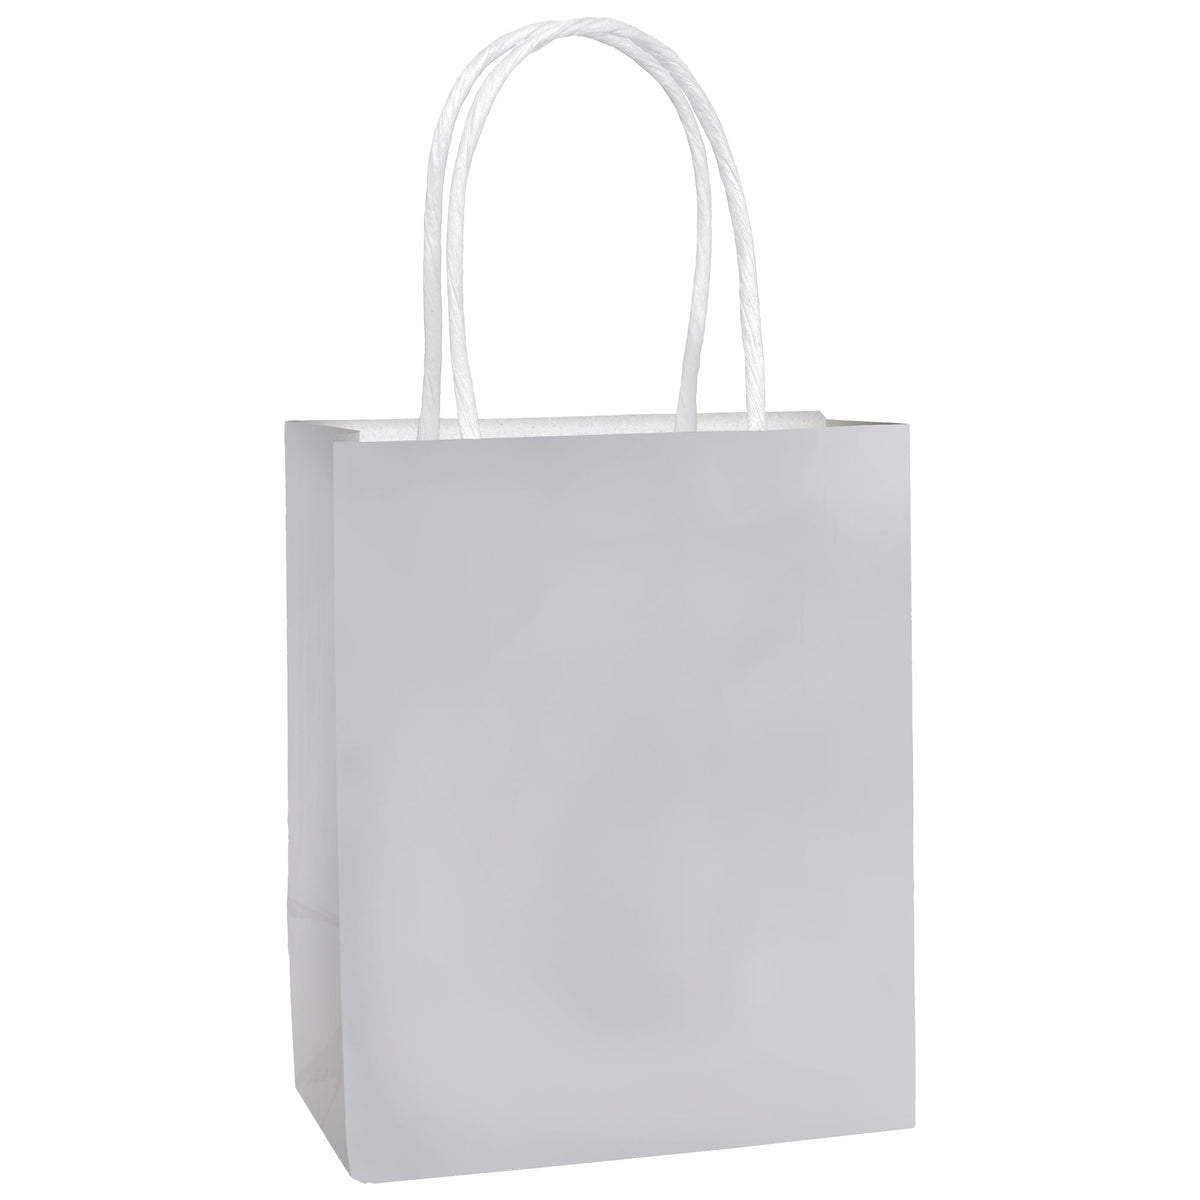 Silver Foil Small 8 1/4"H x 5 1/8"W x 3 1/8"D Handled Paper Bag